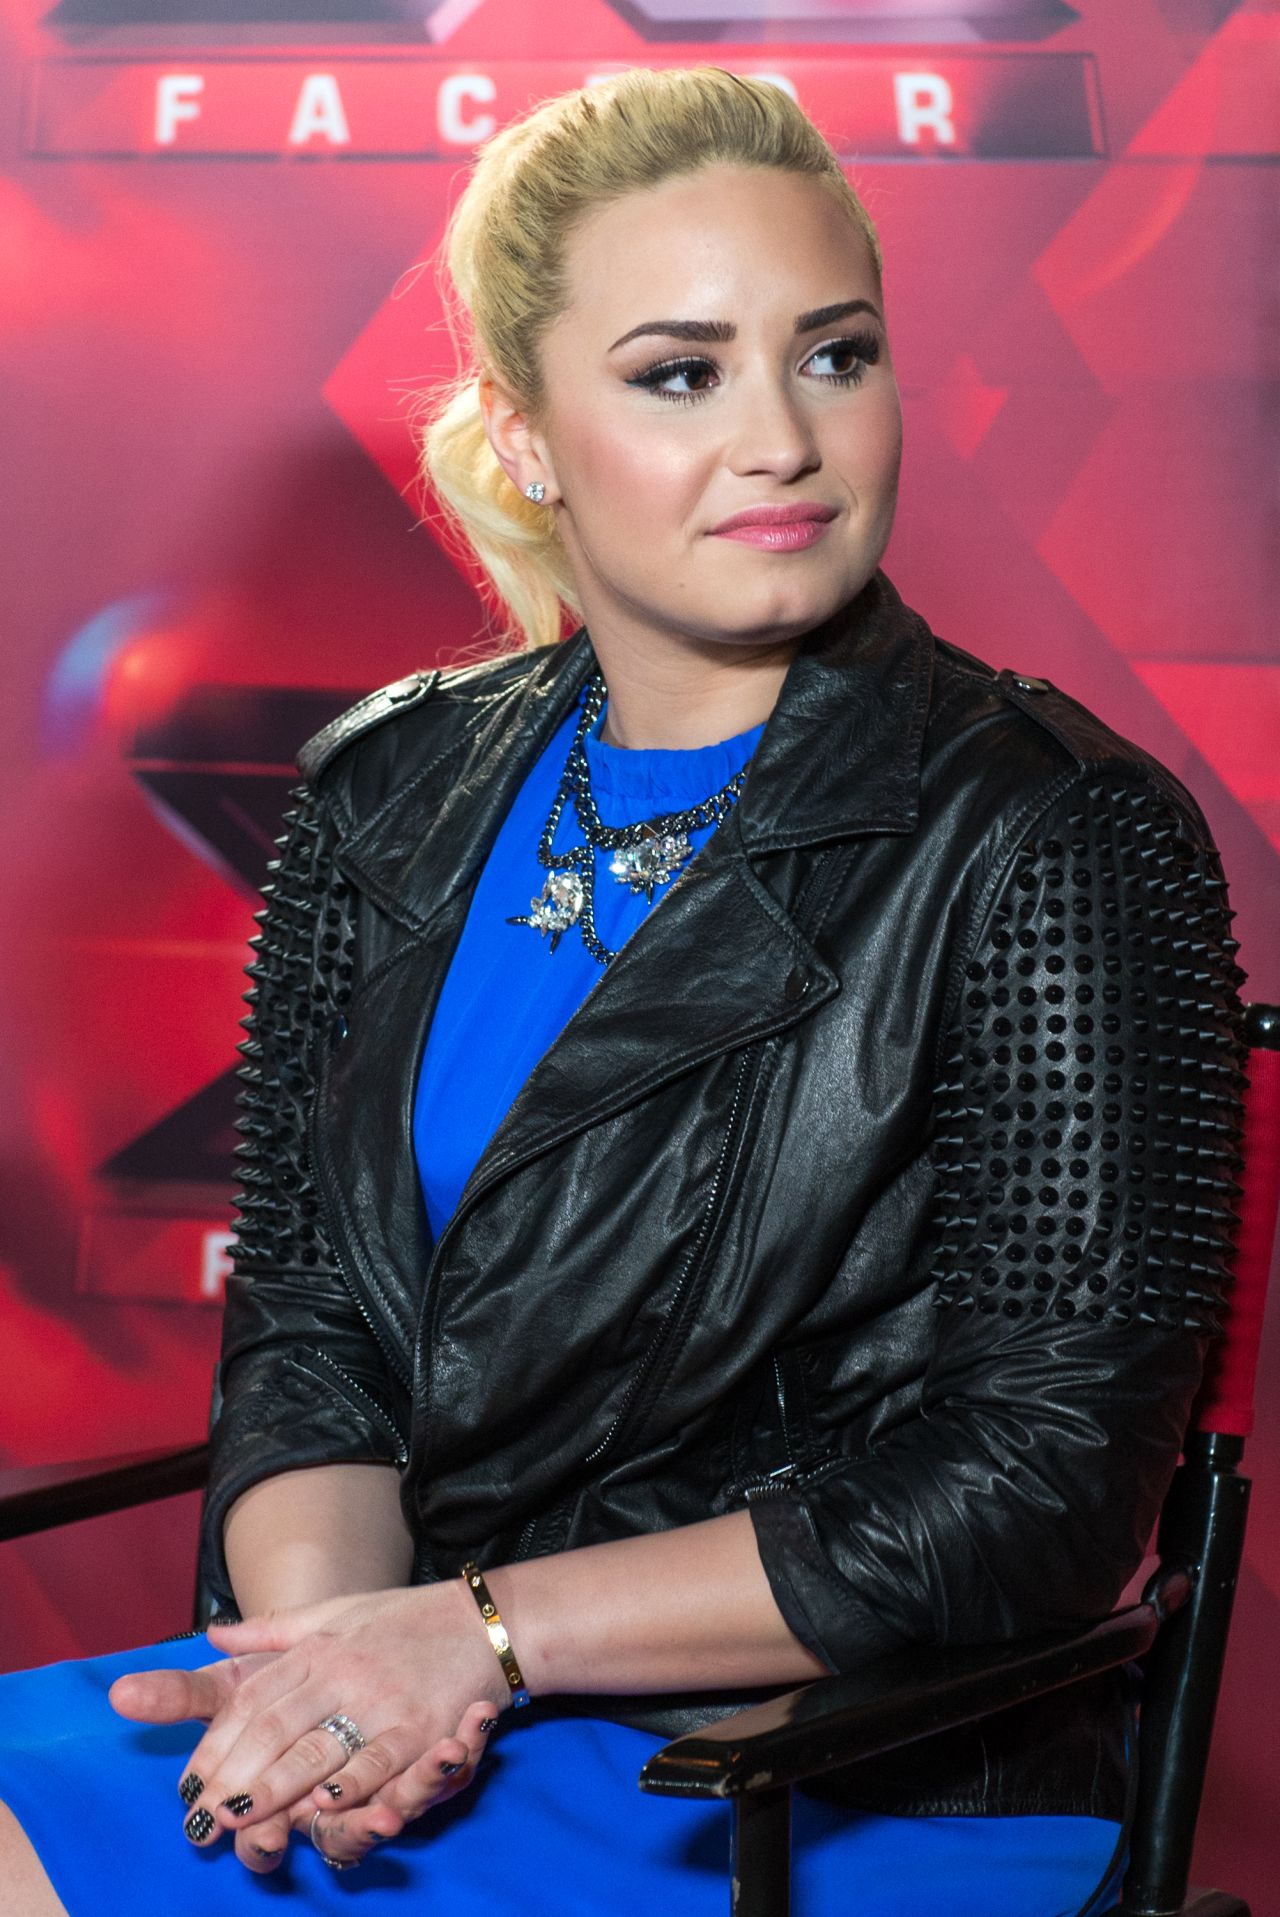 <strong>Demi Lovato</strong> has been open about her substance abuse, but when she first sought help in 2010, <a href="http://marquee.blogs.cnn.com/2010/11/02/lovatos-reps-make-it-clear-shes-not-in-rehab/?iref=allsearch" target="_blank">her reps made it very clear</a> that she was "in a treatment center" for <a href="http://www.cnn.com/2010/SHOWBIZ/celebrity.news.gossip/11/02/demi.lovato.treatment/index.html?section=cnn_latest" target="_blank">"emotional and physical issues."</a>